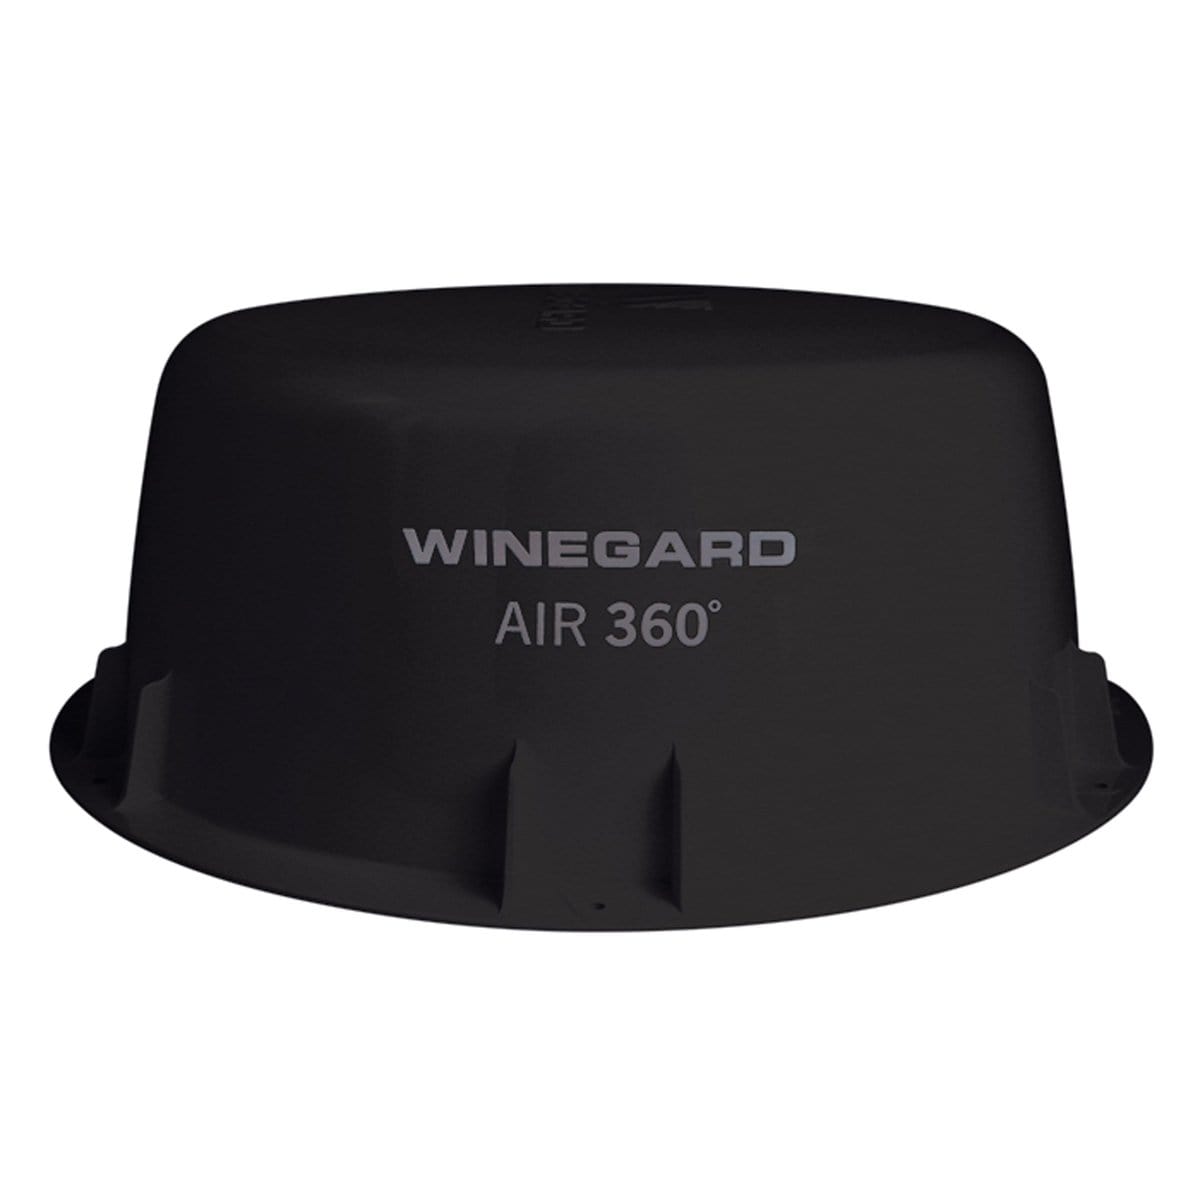 Winegard Qualifies for Free Shipping Winegard Air 360 Omnidirectional VHF/UHF/AM/FM RV Antenna Black #A3-2035